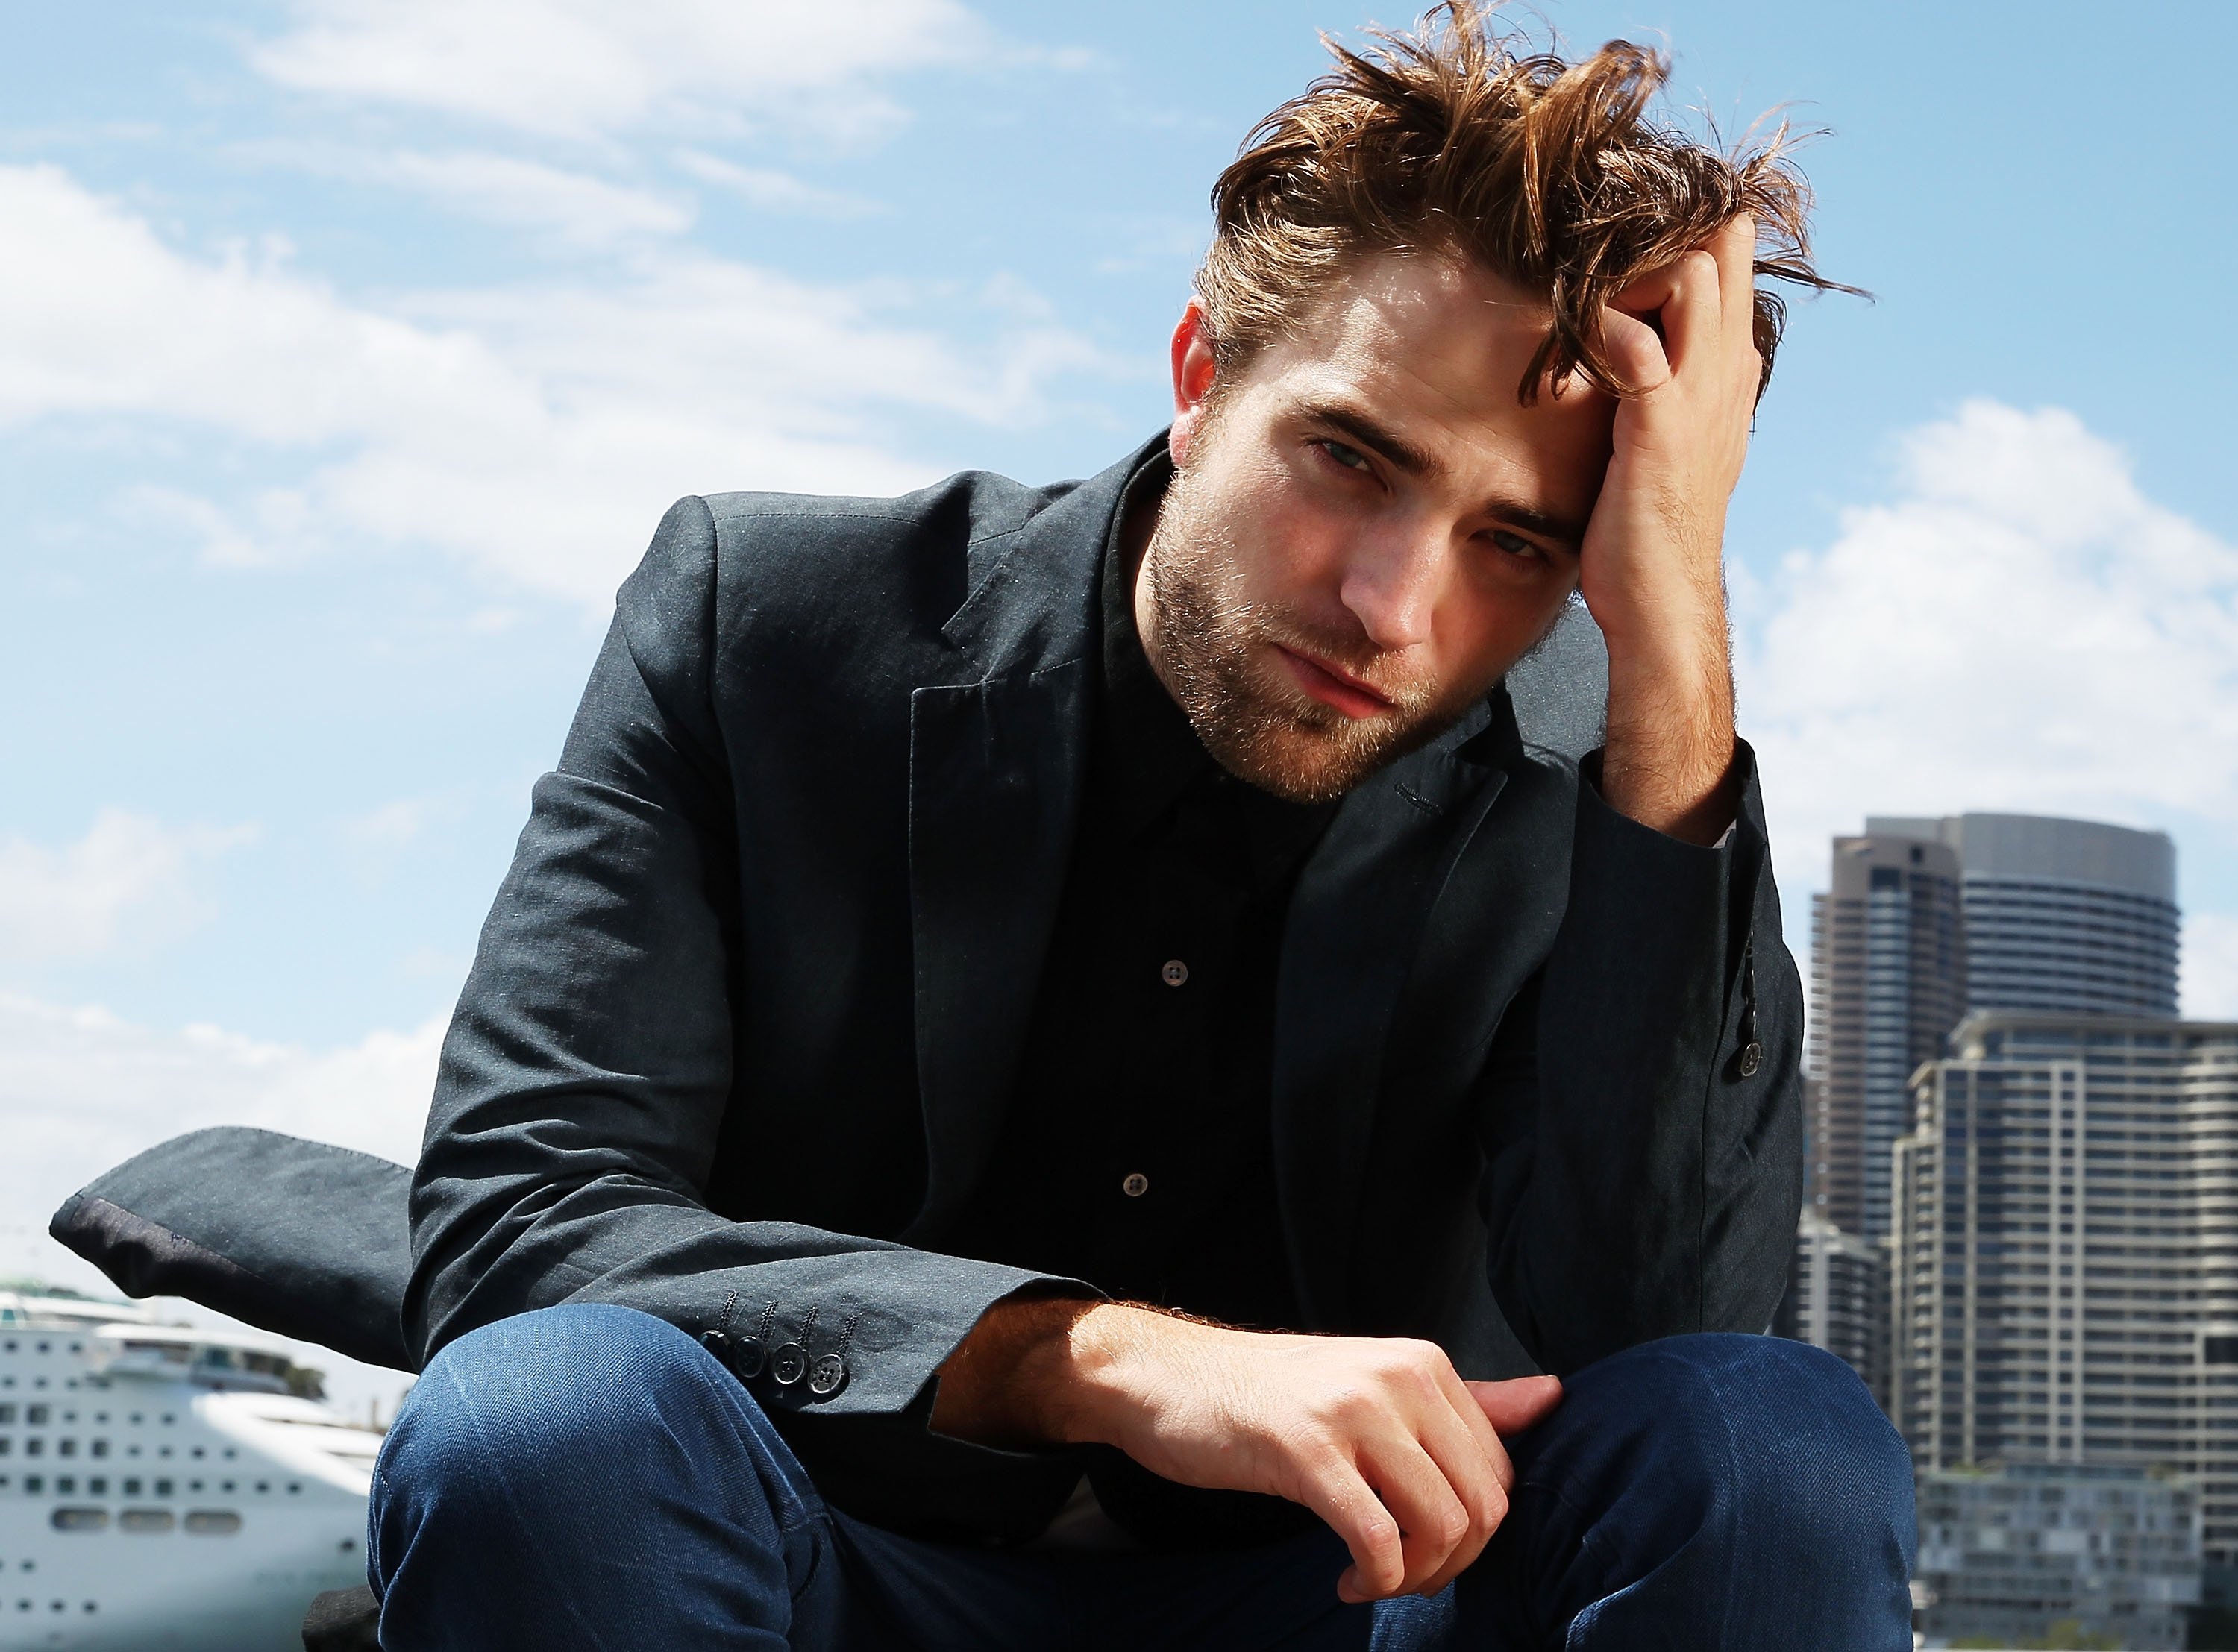 Robert Pattinson poses during a photo call to promote "Breaking Dawn - Part 2" on October 22, 2012 in Sydney, Australia. | Source: Getty Images